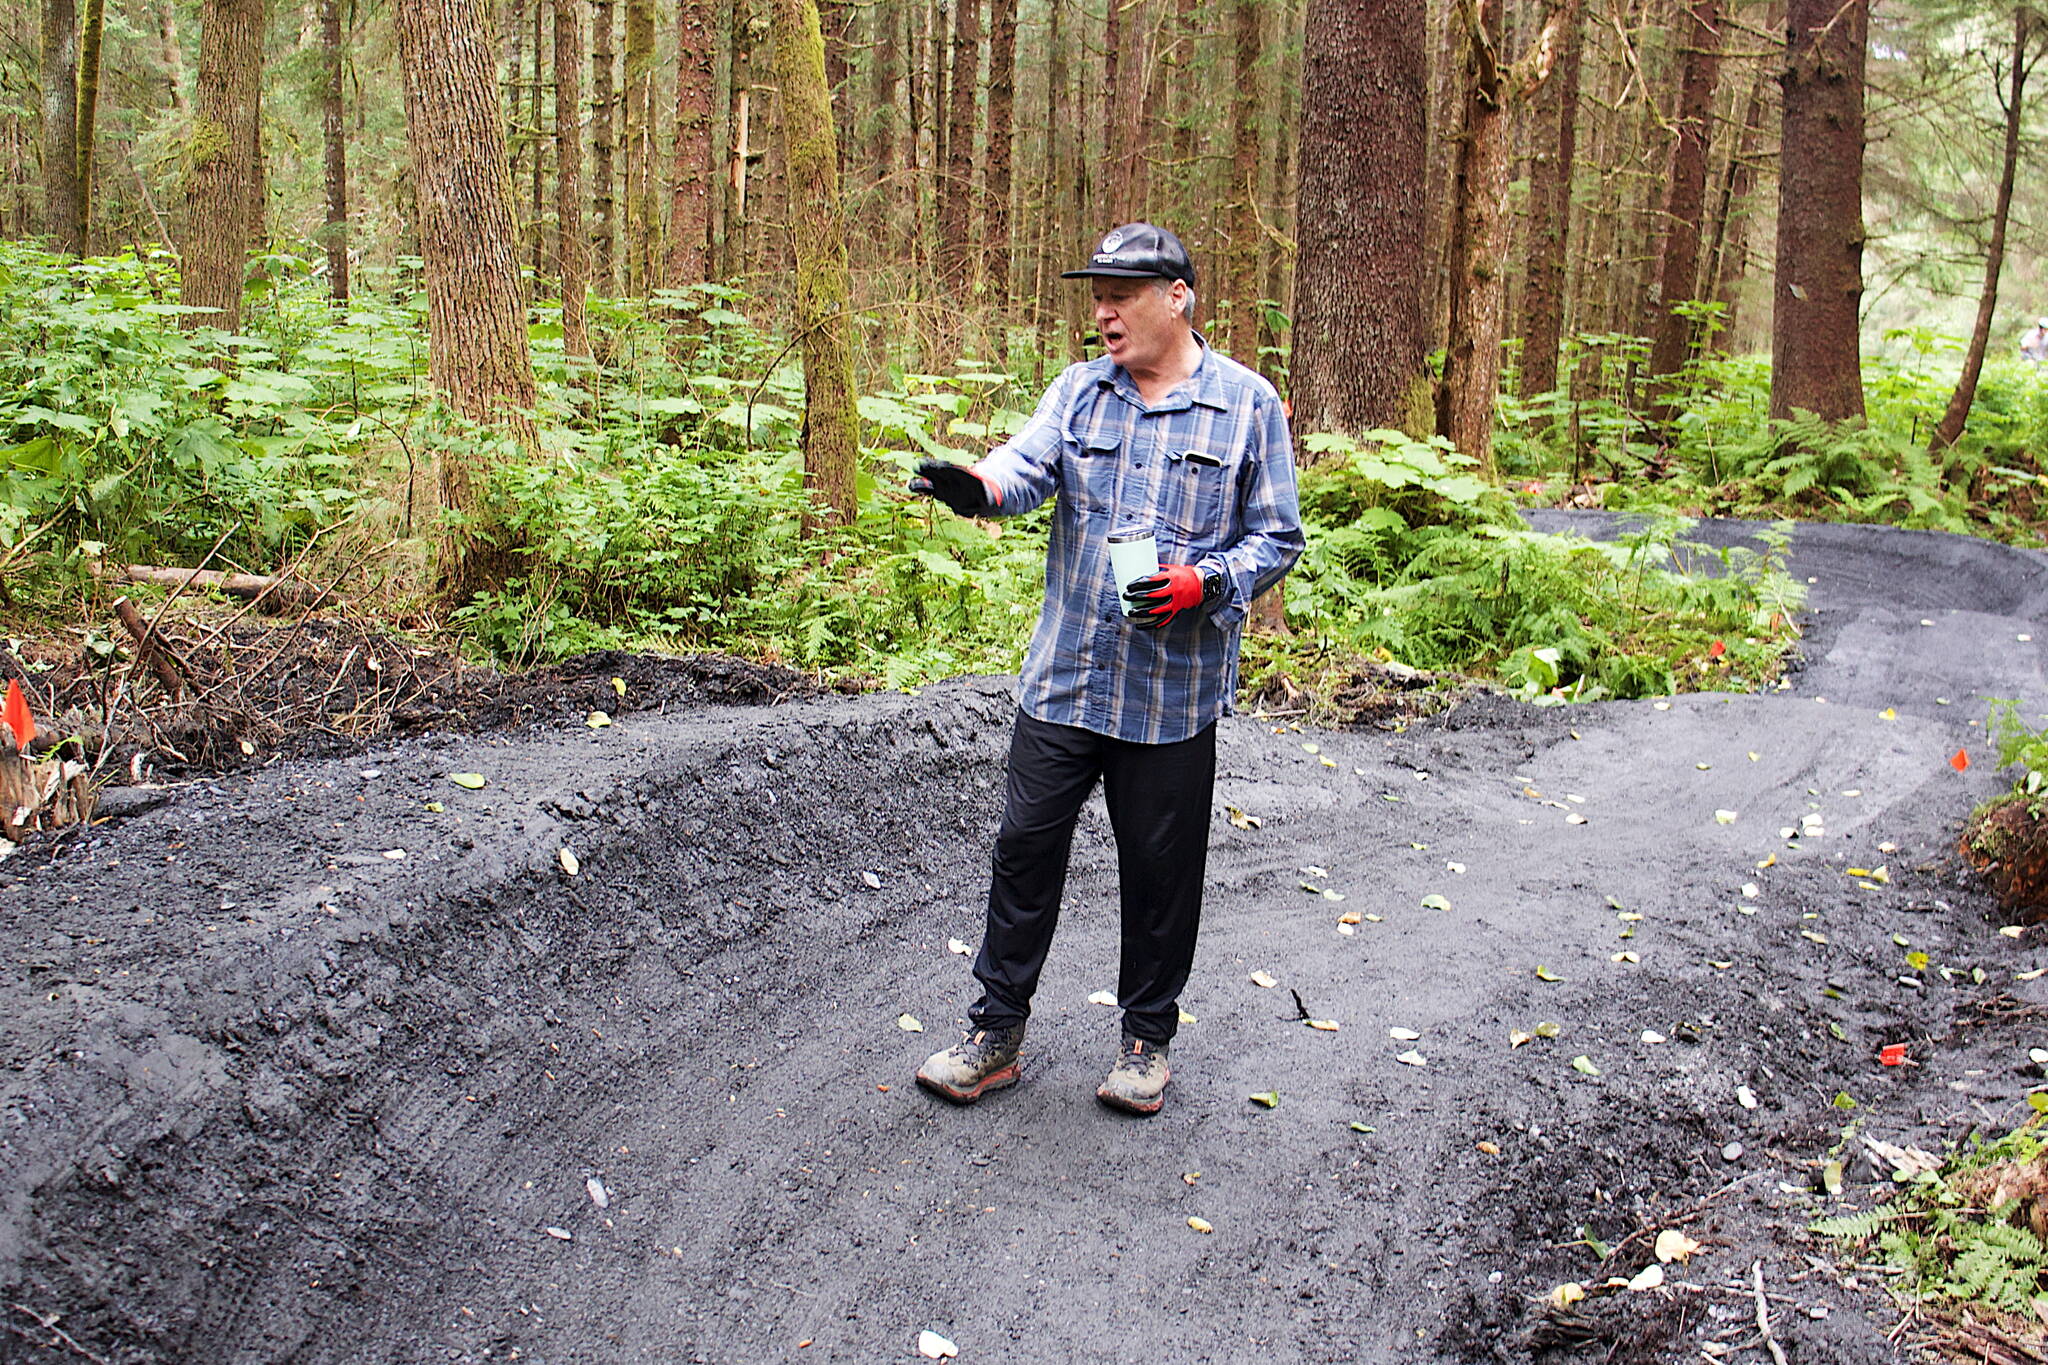 Jack Kreinheder, a board member of both the Juneau Mountain Bike Alliance and Trail Mix, explains the planning process for the turns and other features on the beginner’s trail at the new Thunder Mountain Bike Park on Saturday. (Mark Sabbatini / Juneau Empire)